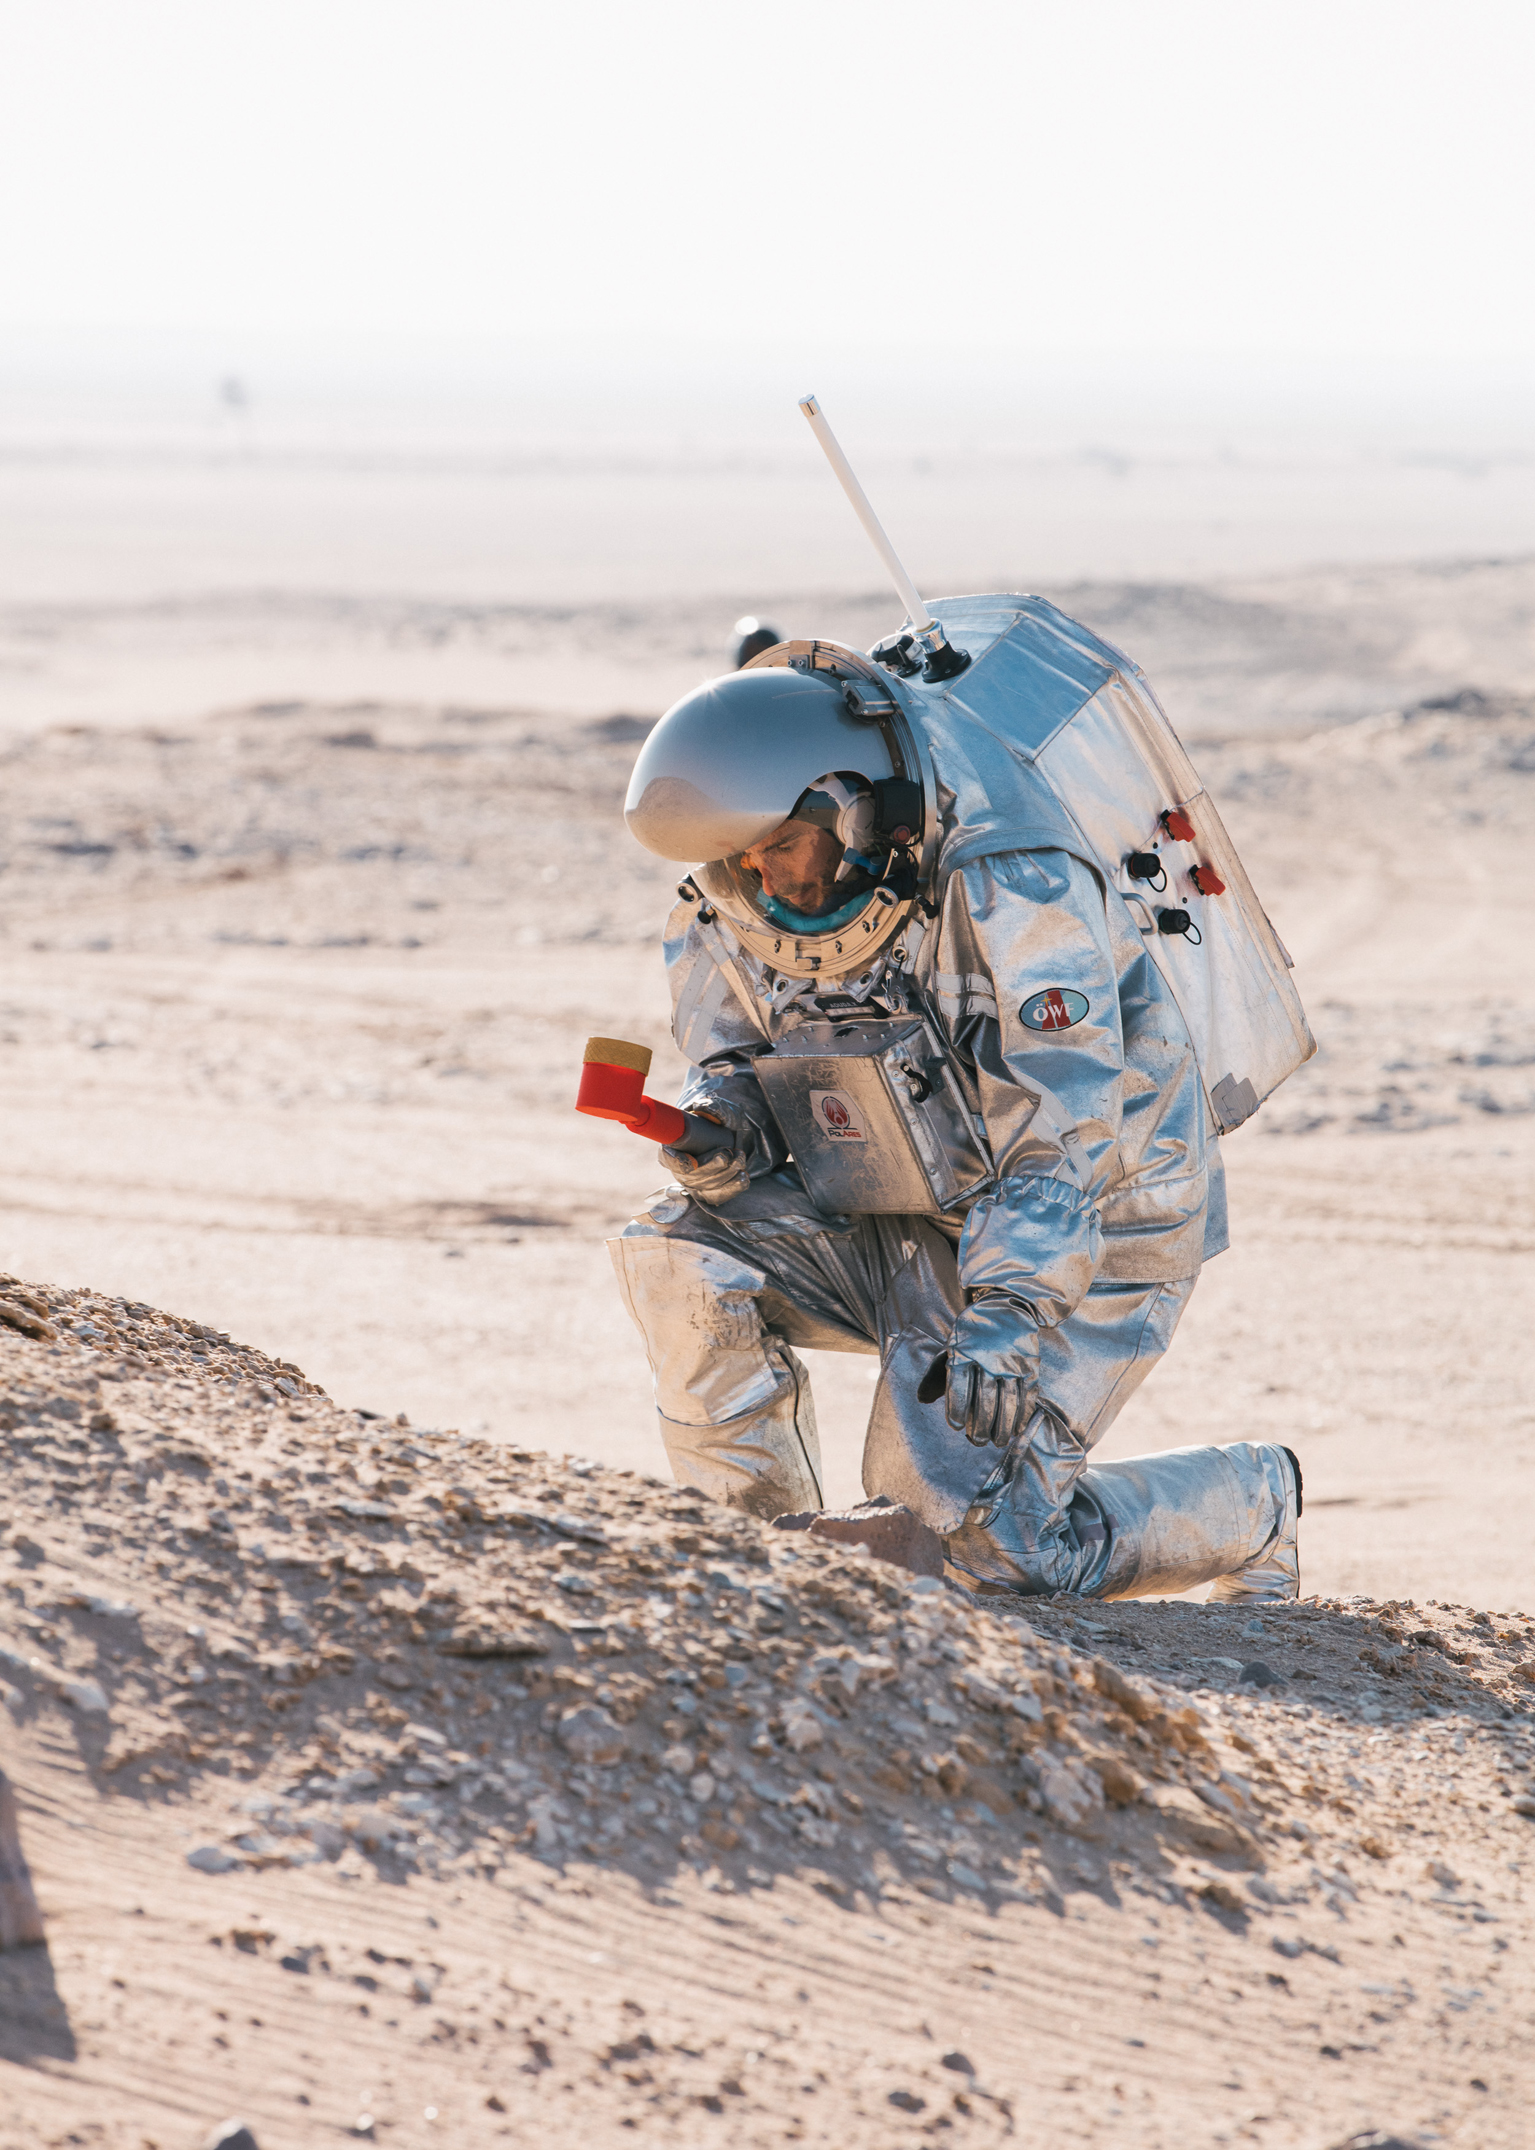 A man in a space suit kneeling takes samples in the red desert sand. He holds a tool in one hand.